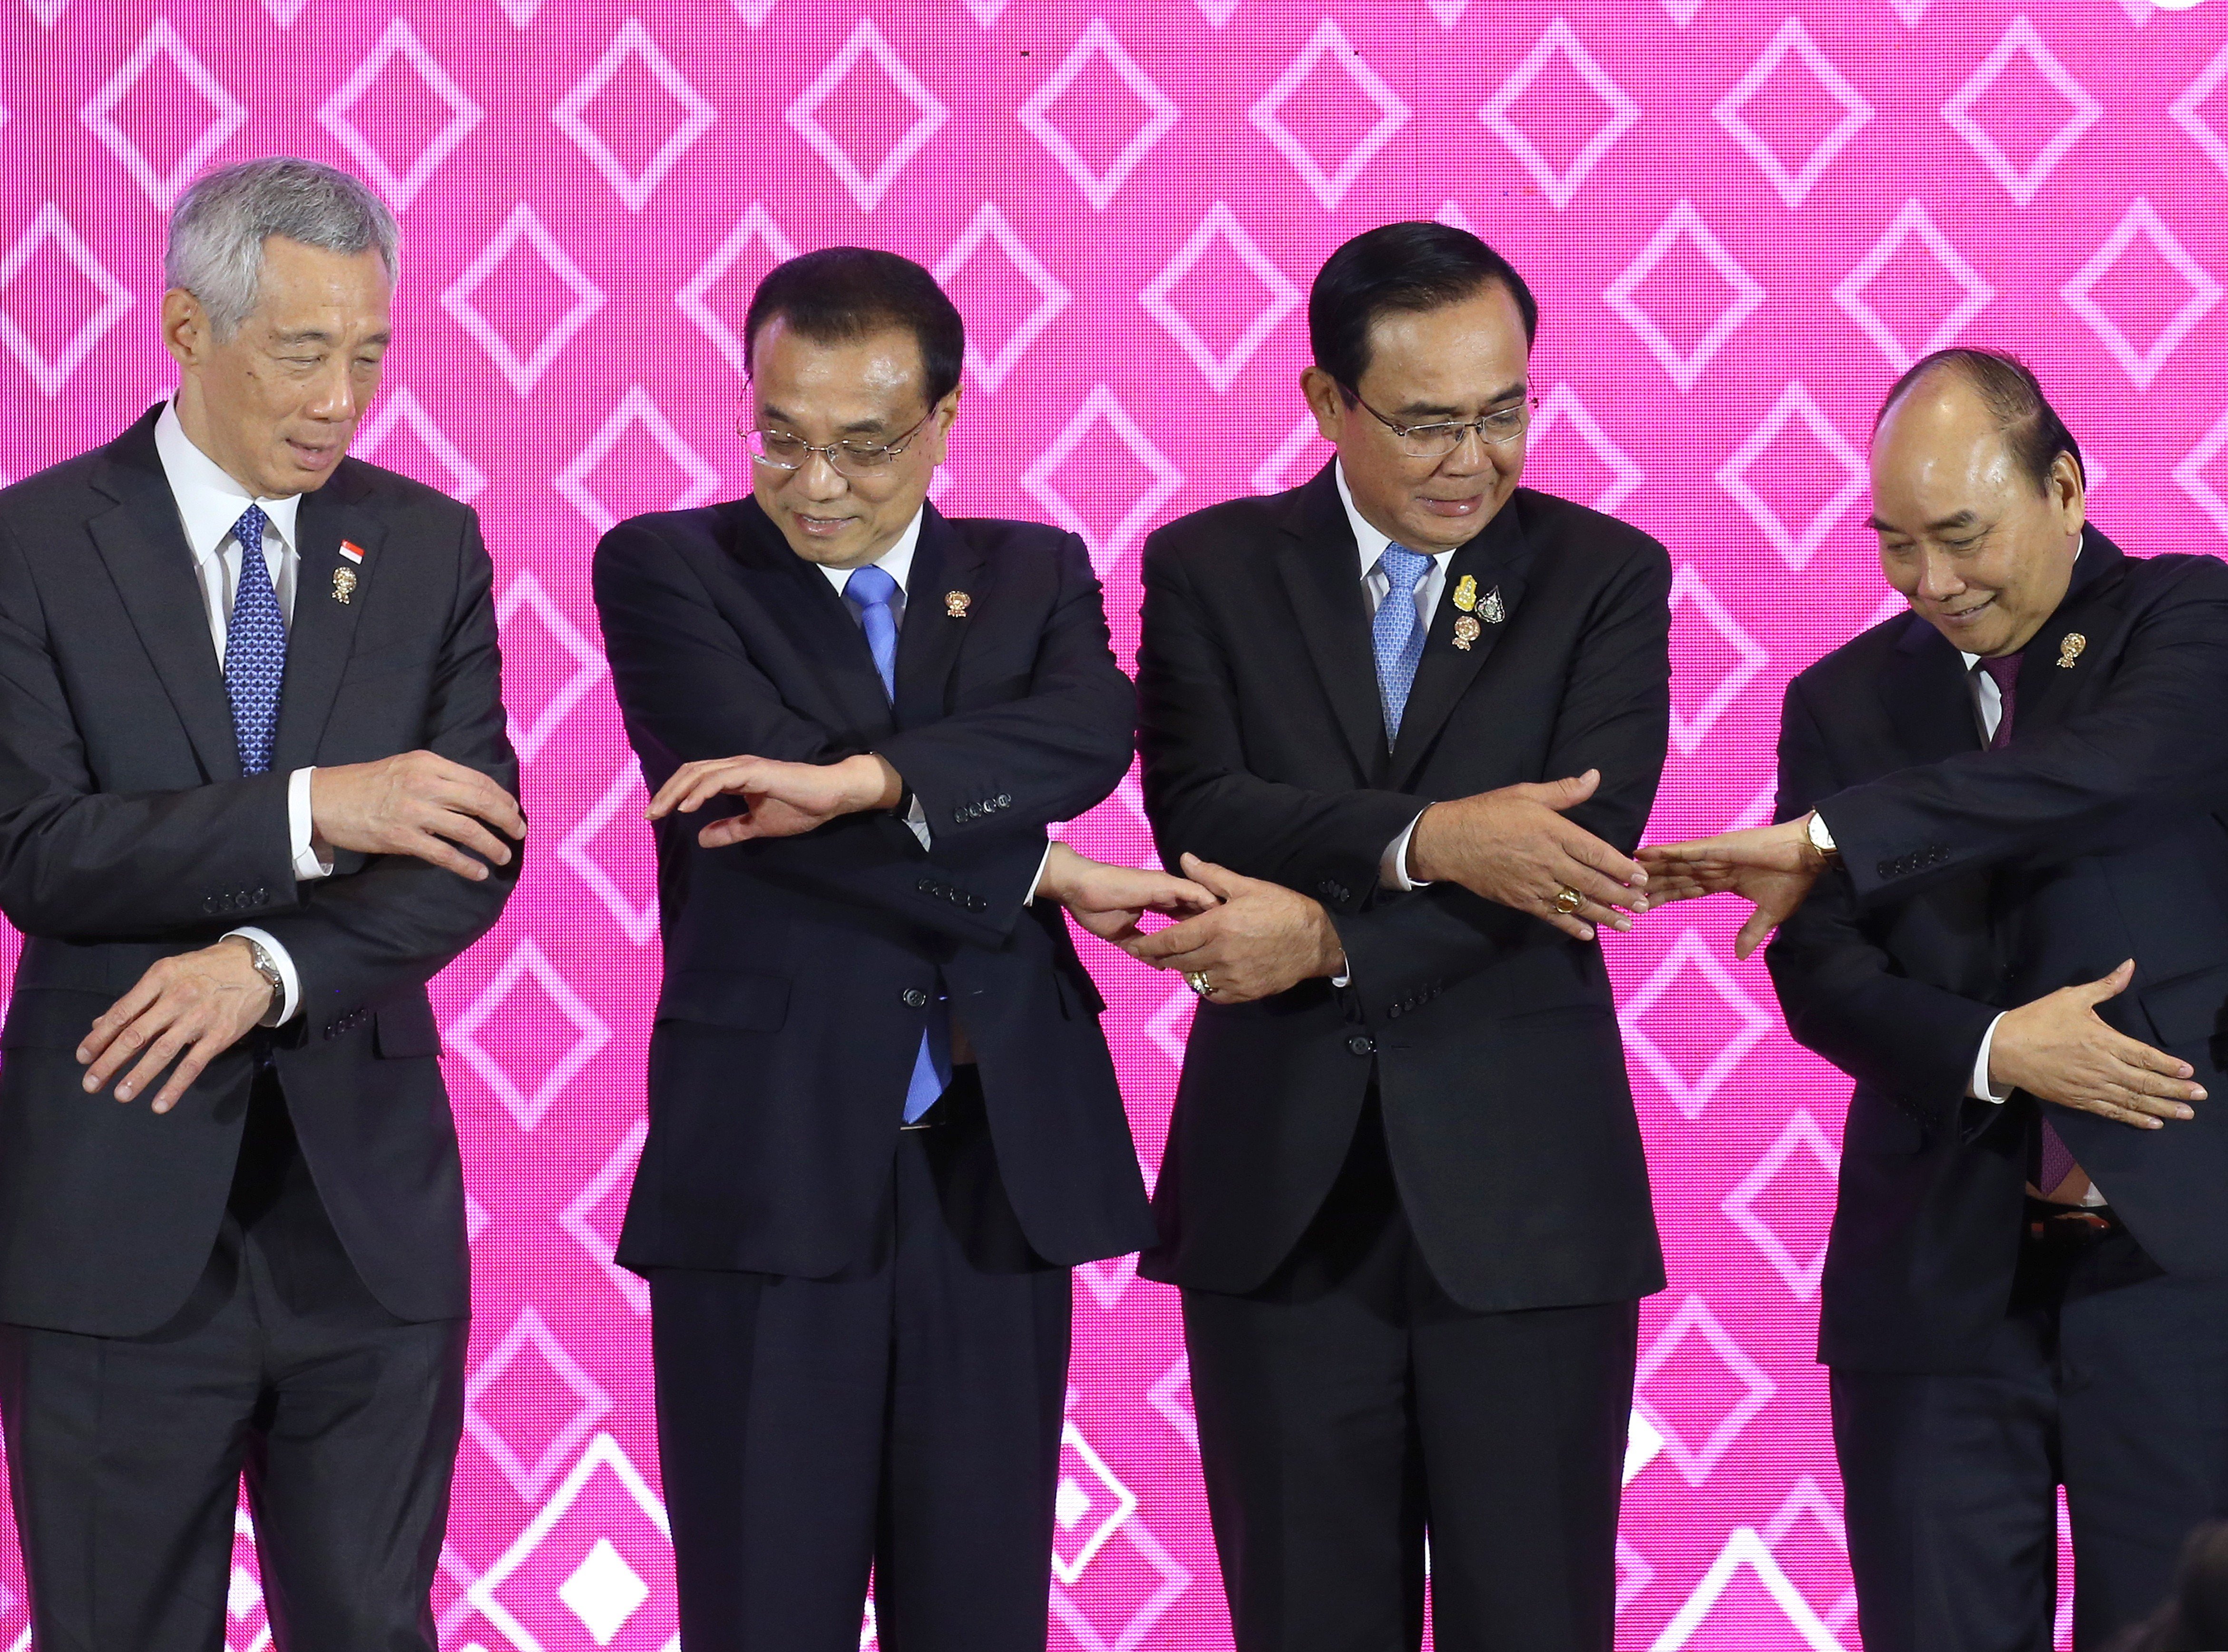 Singapore's Prime Minister Lee Hsien Loong, China's Premier Li Keqiang, Thailand's Prime Minister Prayuth Chan-ocha and Vietnam's Prime Minister Nguyen Xuan Phuc link hands to pose for a group photo during the 22nd Asean – China Summit in Bangkok. Photo: EPA